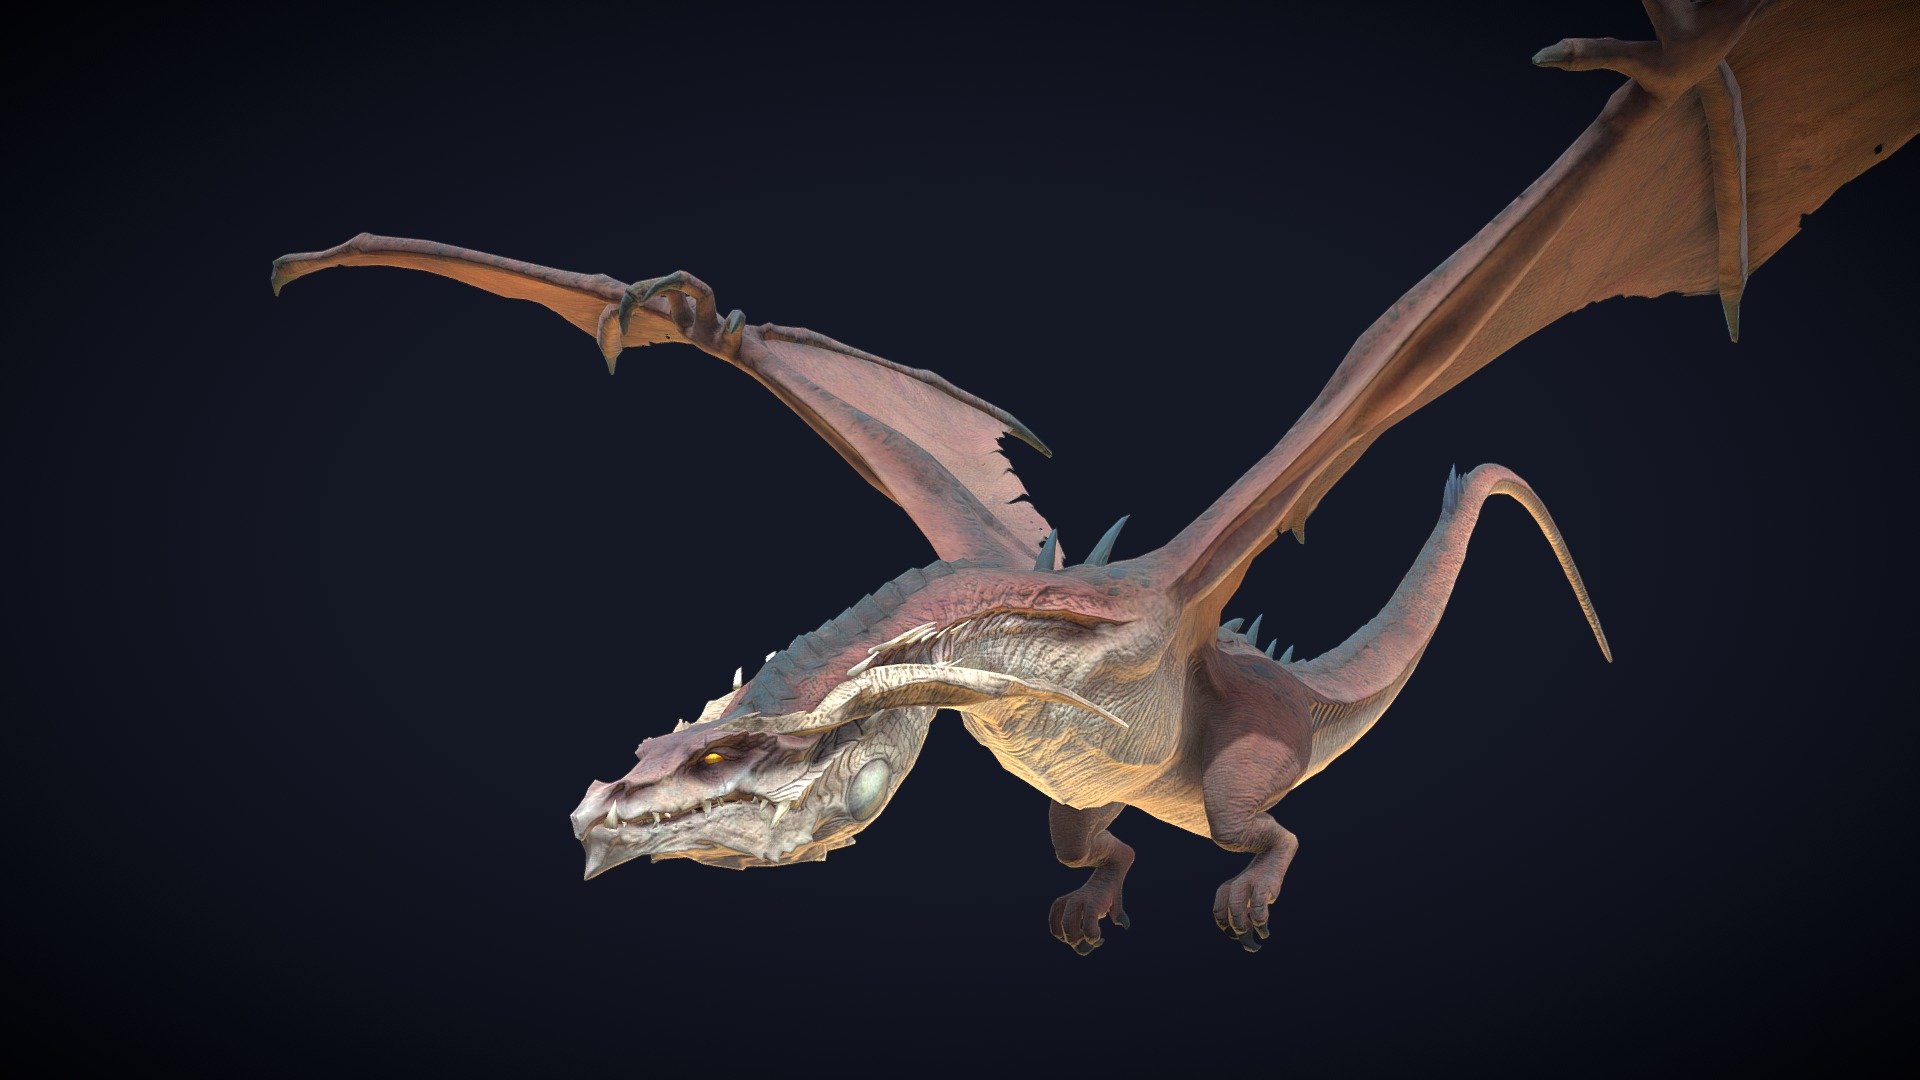 An Animated Dragon with Three different Motion Loops.

Place this model in your space using web-based augmented reality:

https://portal.worldcast.io/show/9bwZjpgWOrVqQxn1rq4bDaXB6vzK3oeEGR5L

No app download required! Open link on mobile device to experience AR.

See this 3D model in action, and more models like it, in this collection of free augmented reality apps:

https://morpheusar.com/ - Animated Dragon Three Motion Loops - Download Free 3D model by LasquetiSpice 3d model